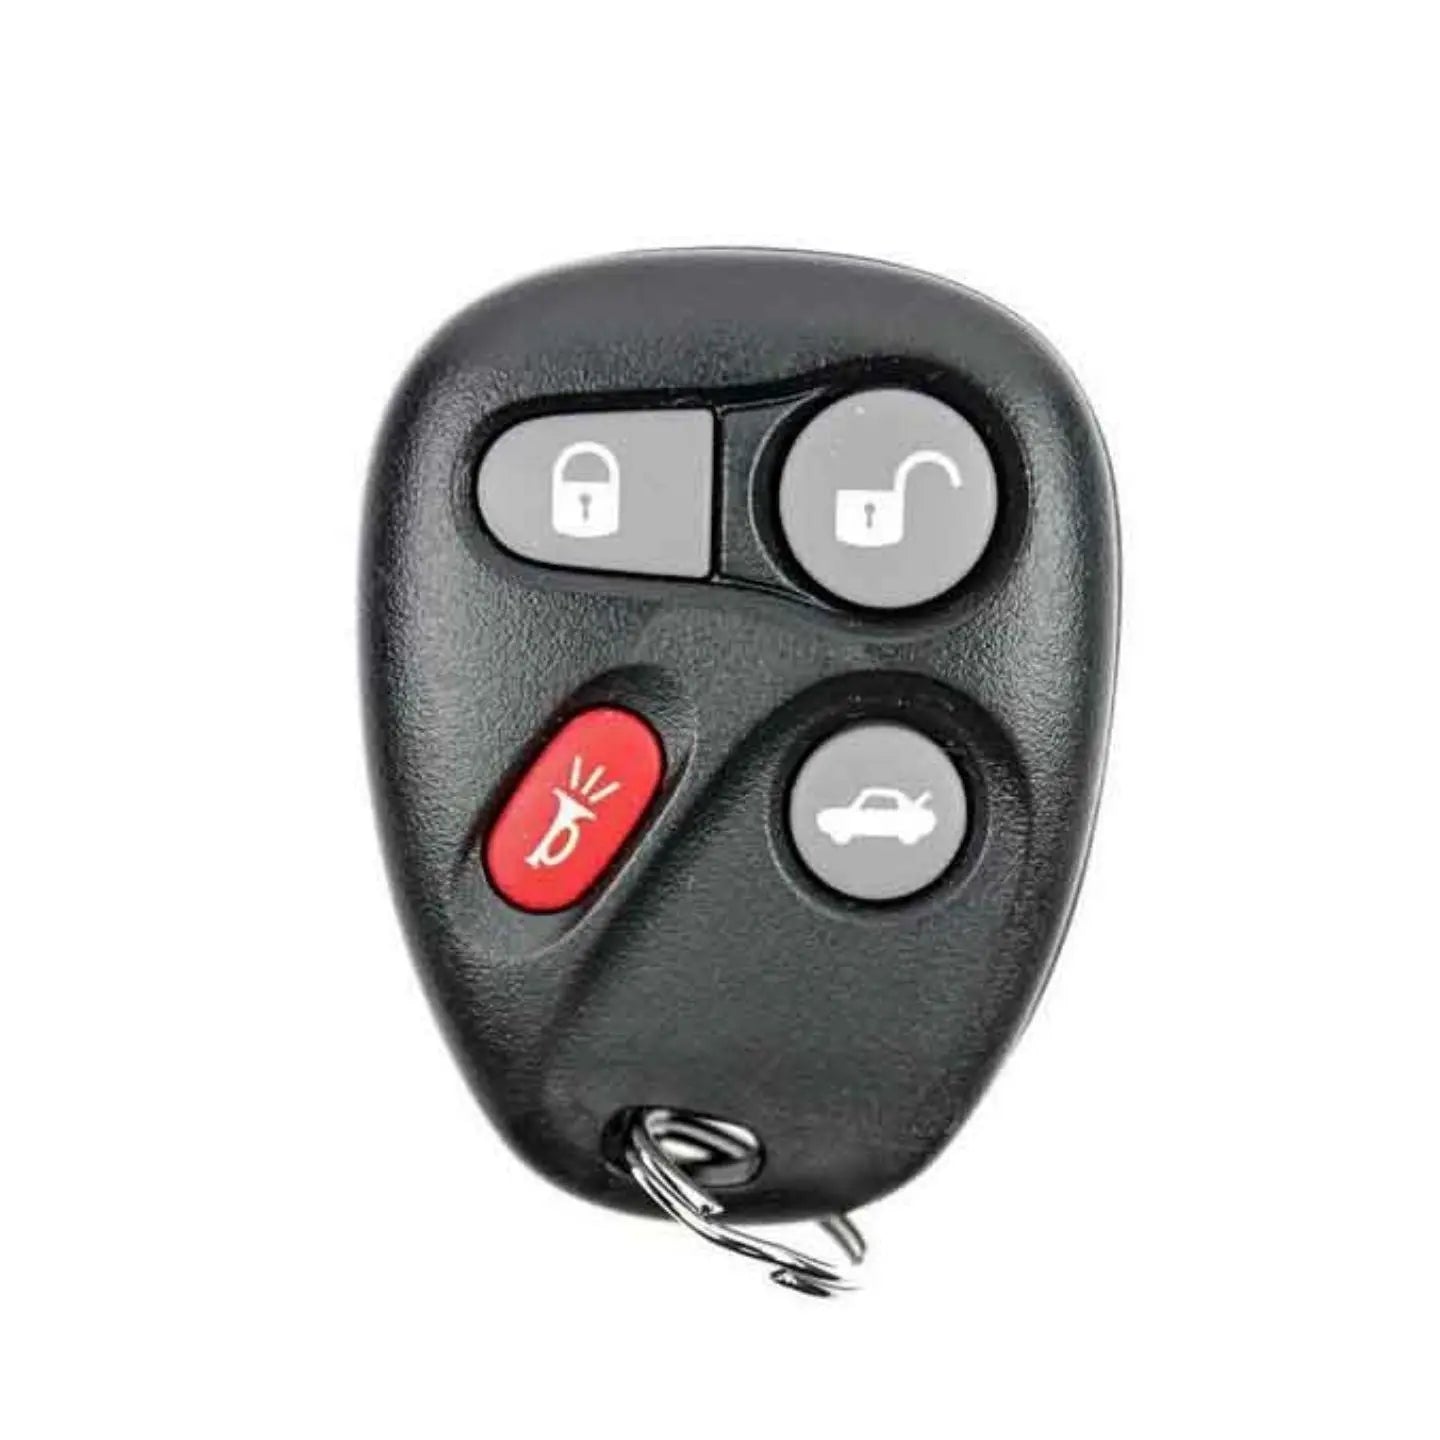 1996-2005 (Aftermarket) Keyless Entry Remote for Buick - Cadillac - GMC - Oldsmobile | PN: 15732805 / KOBUT1BT